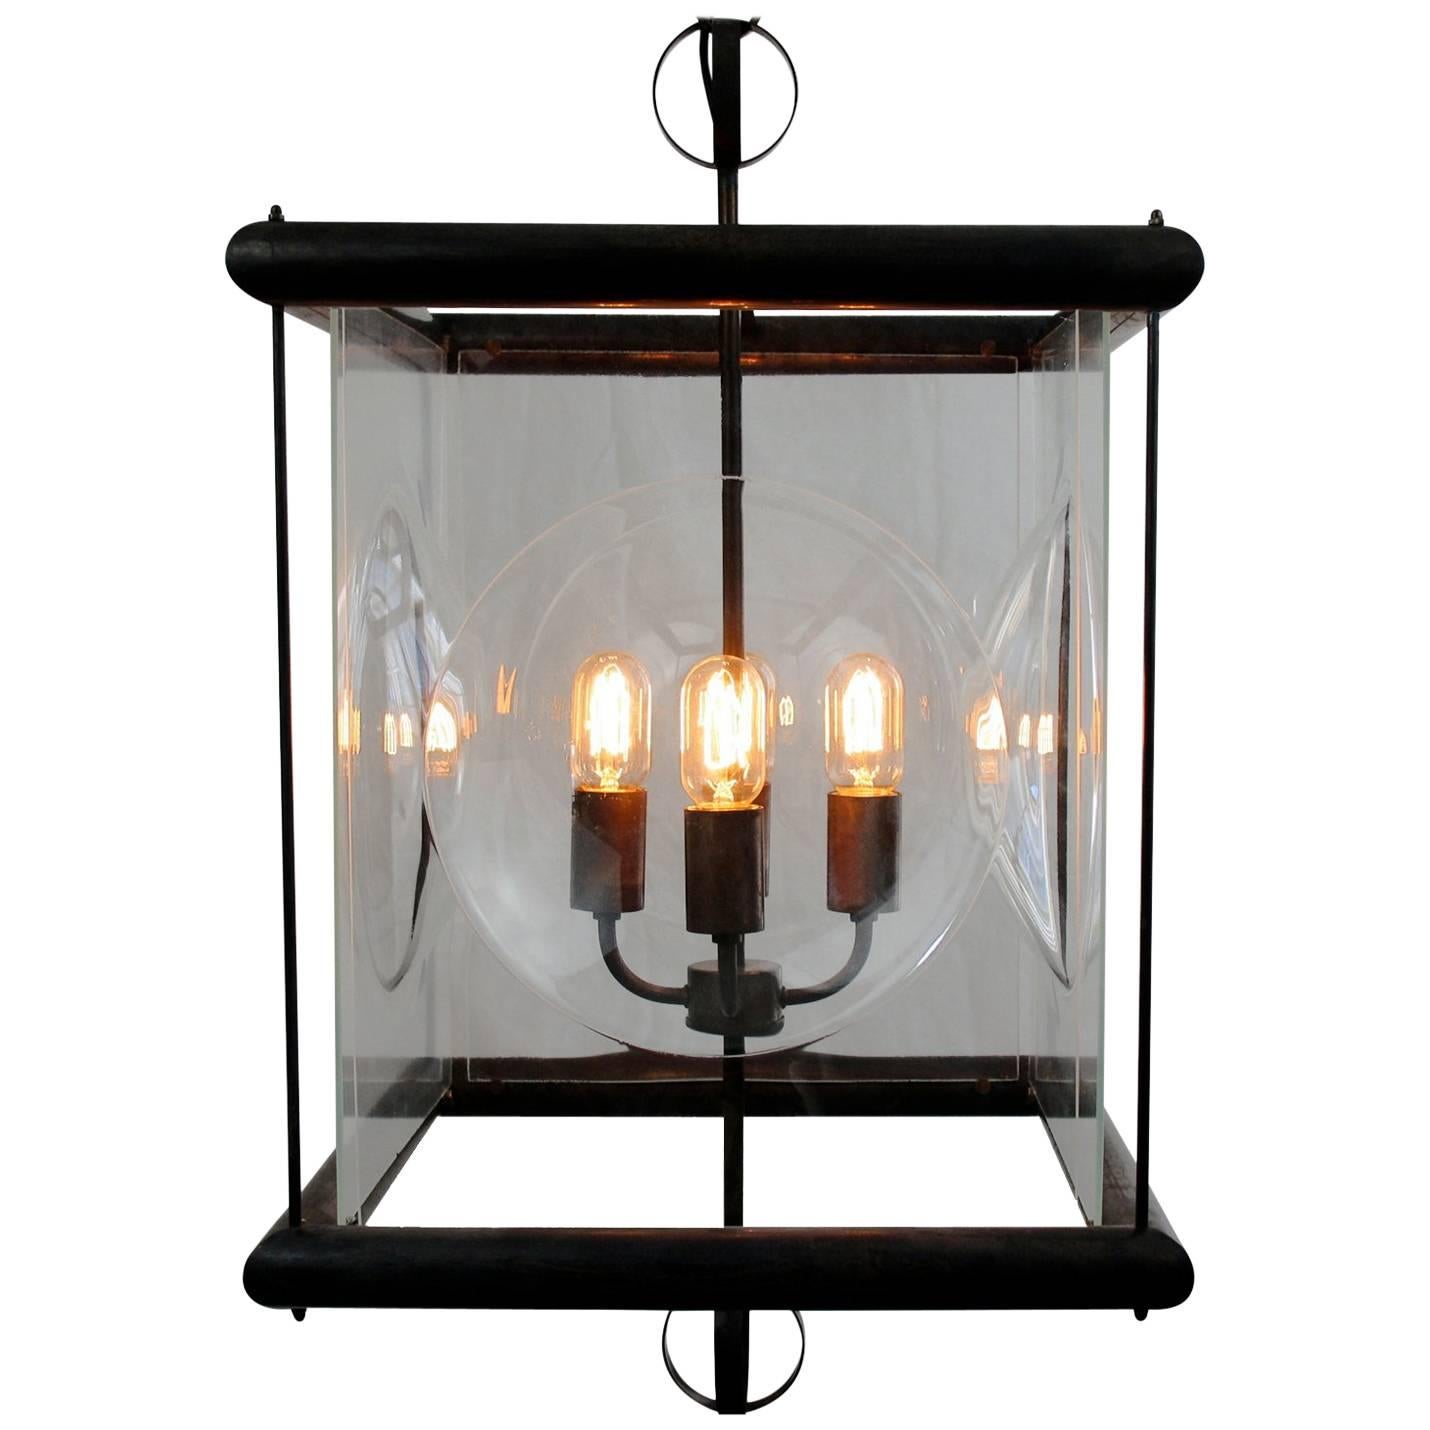 New Brass Tube and Glass Pendant Lantern "Bolle", Handmade in Italy, in Stock im Angebot